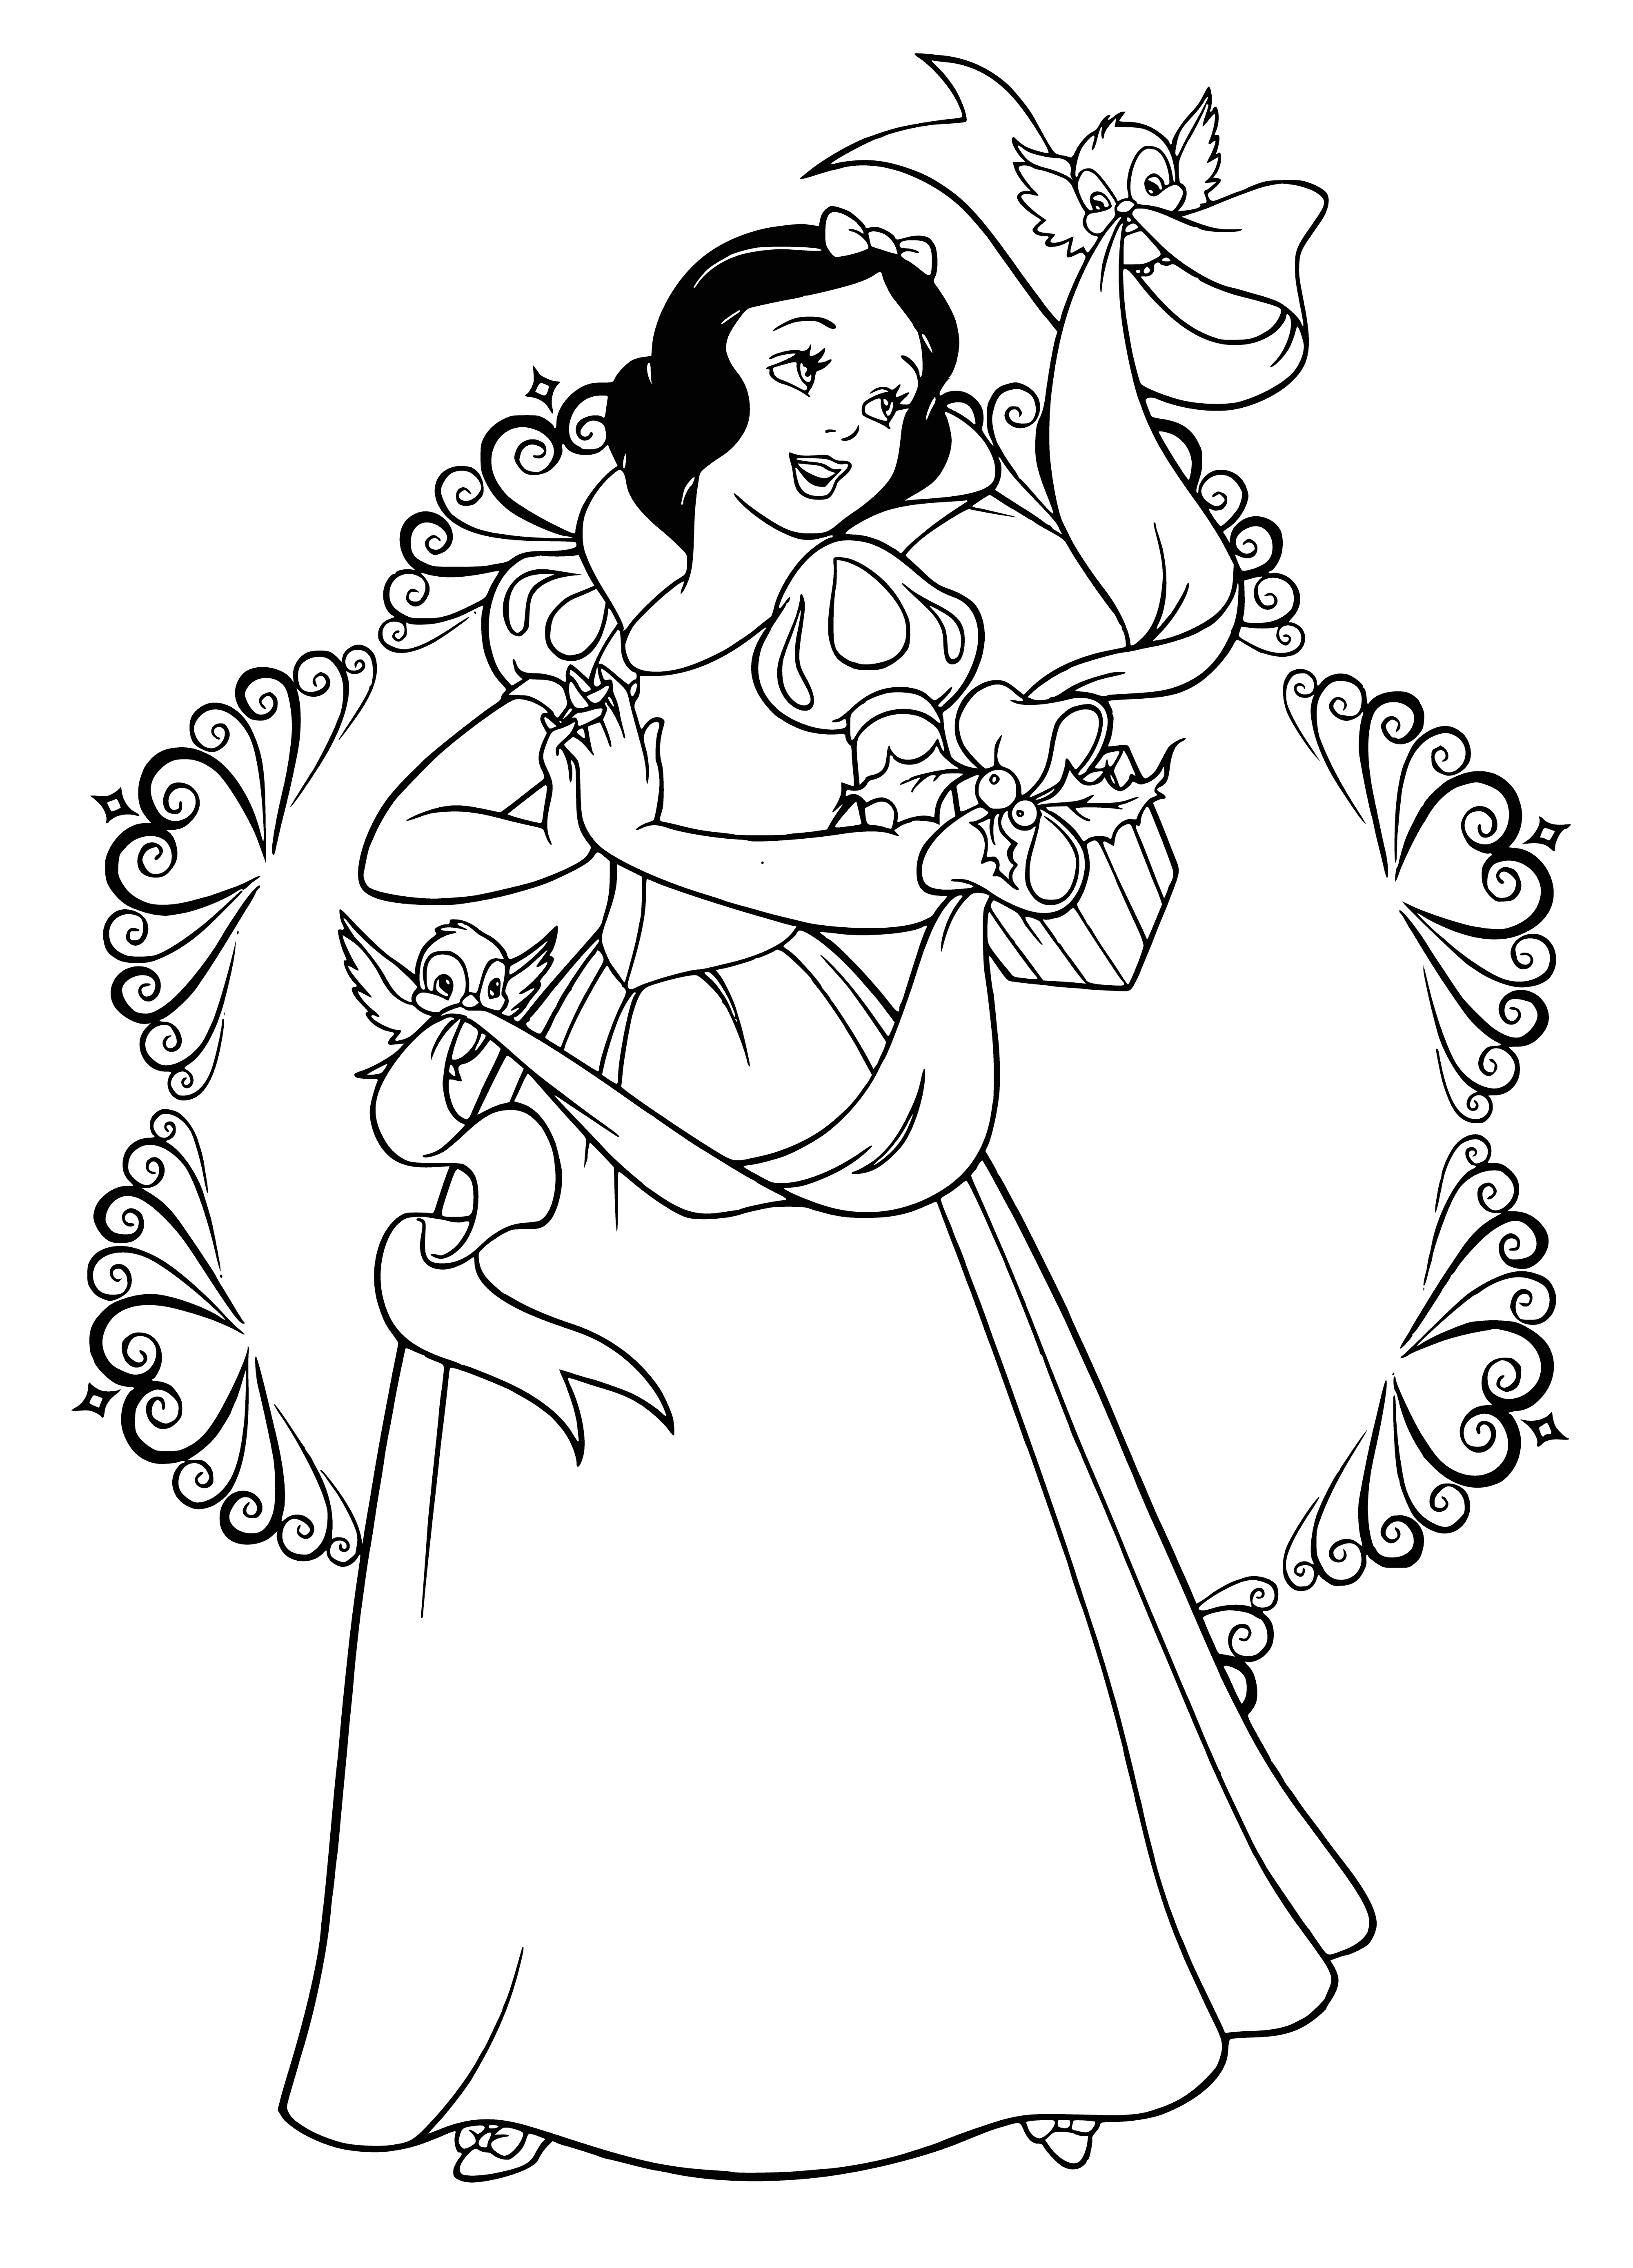 coloring page: The seven Disney princesses gather for New Year's Eve and Snow White has a surprise: a present and Happy New Year card! They seem to be having a wonderful time. #DisneyPrincesses